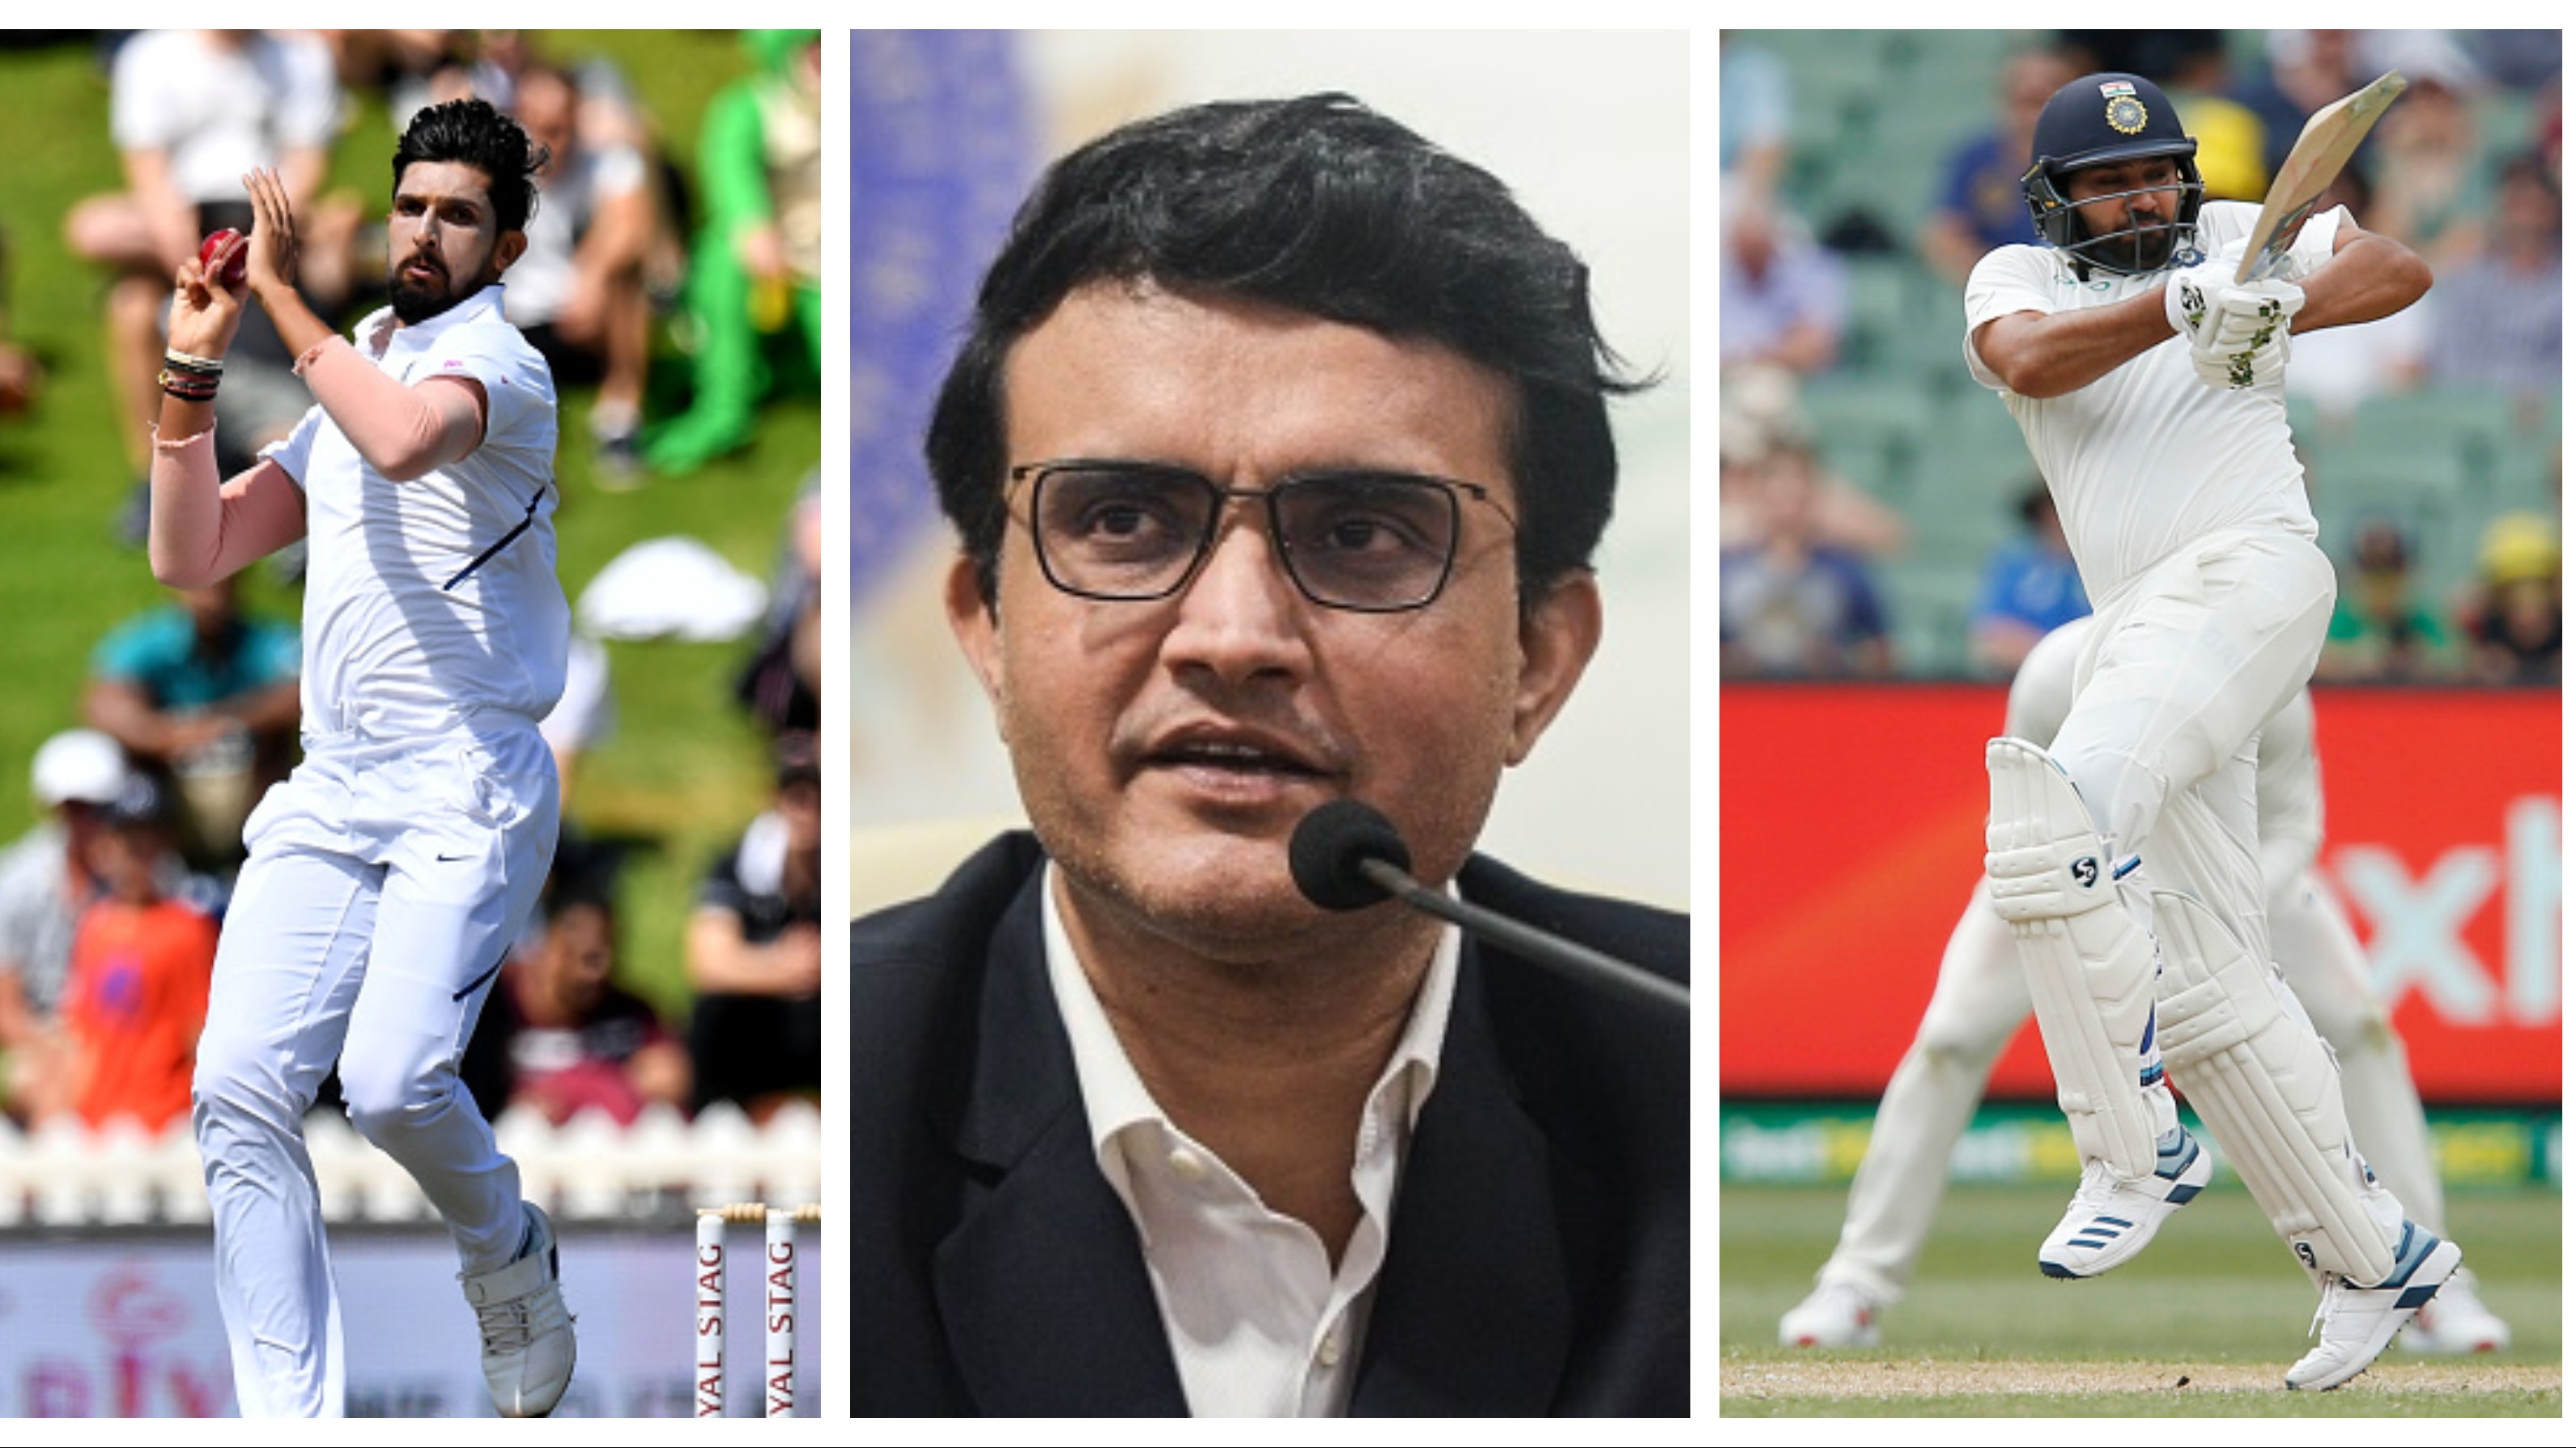 AUS v IND 2020-21: Ganguly to speak with CA in hope to negotiate quarantine terms for Rohit, Ishant - Report